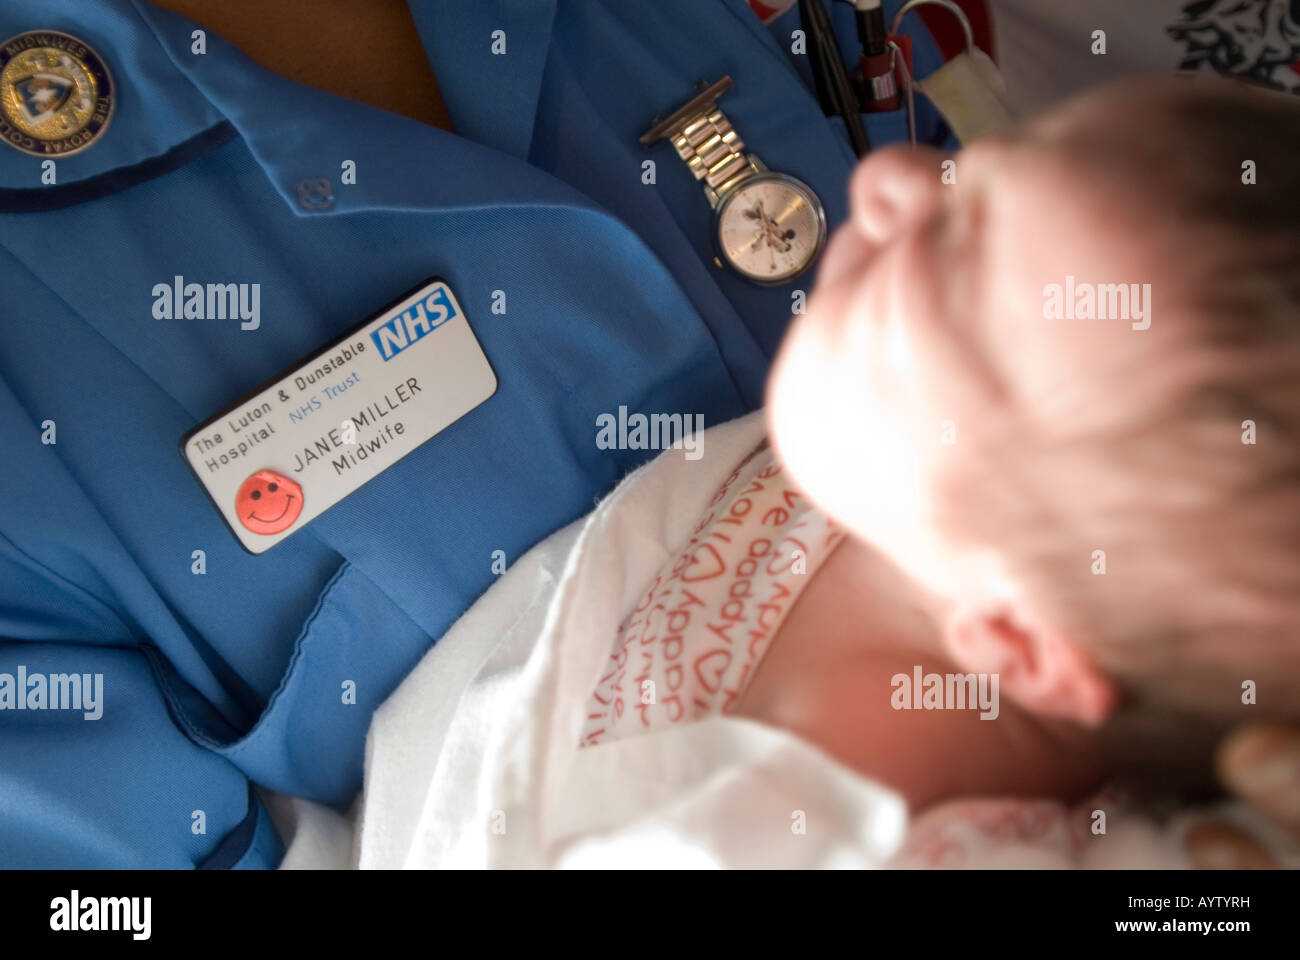 Midwife with new born baby Stock Photo